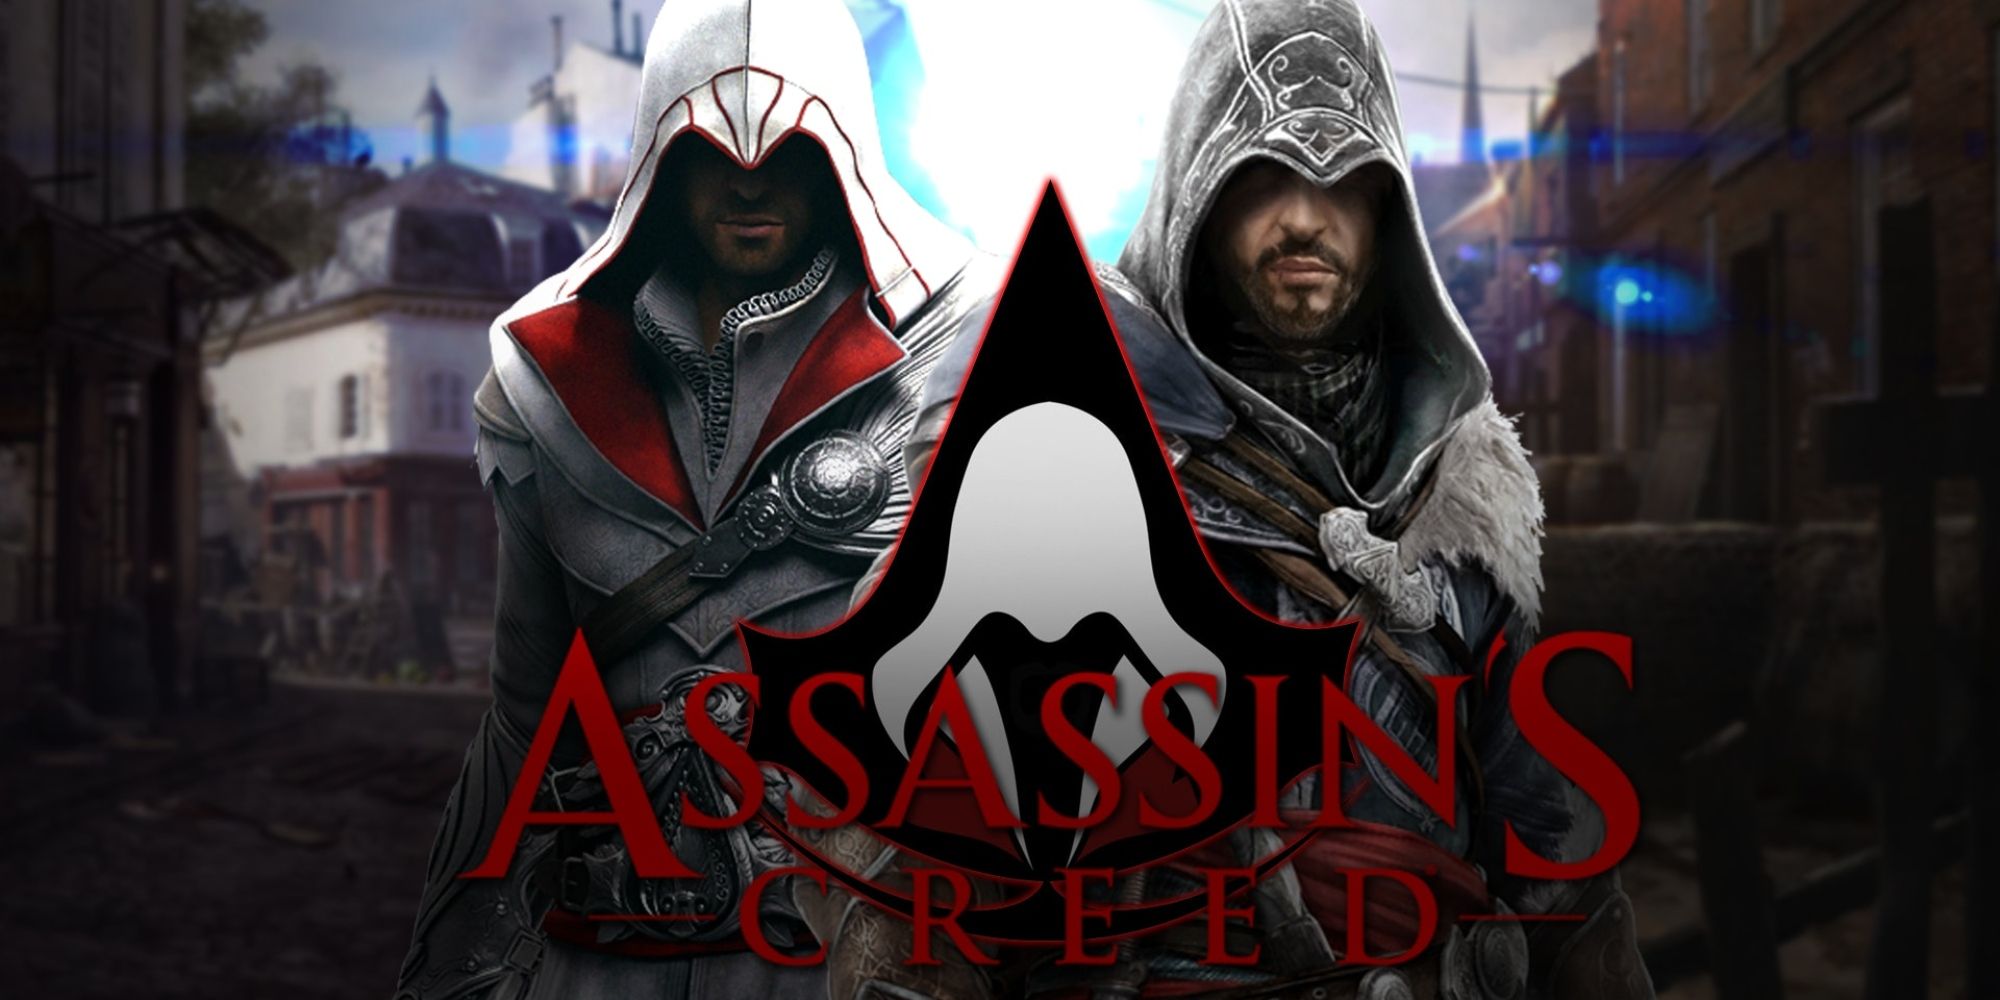 Assassin’s Creed download the last version for ios